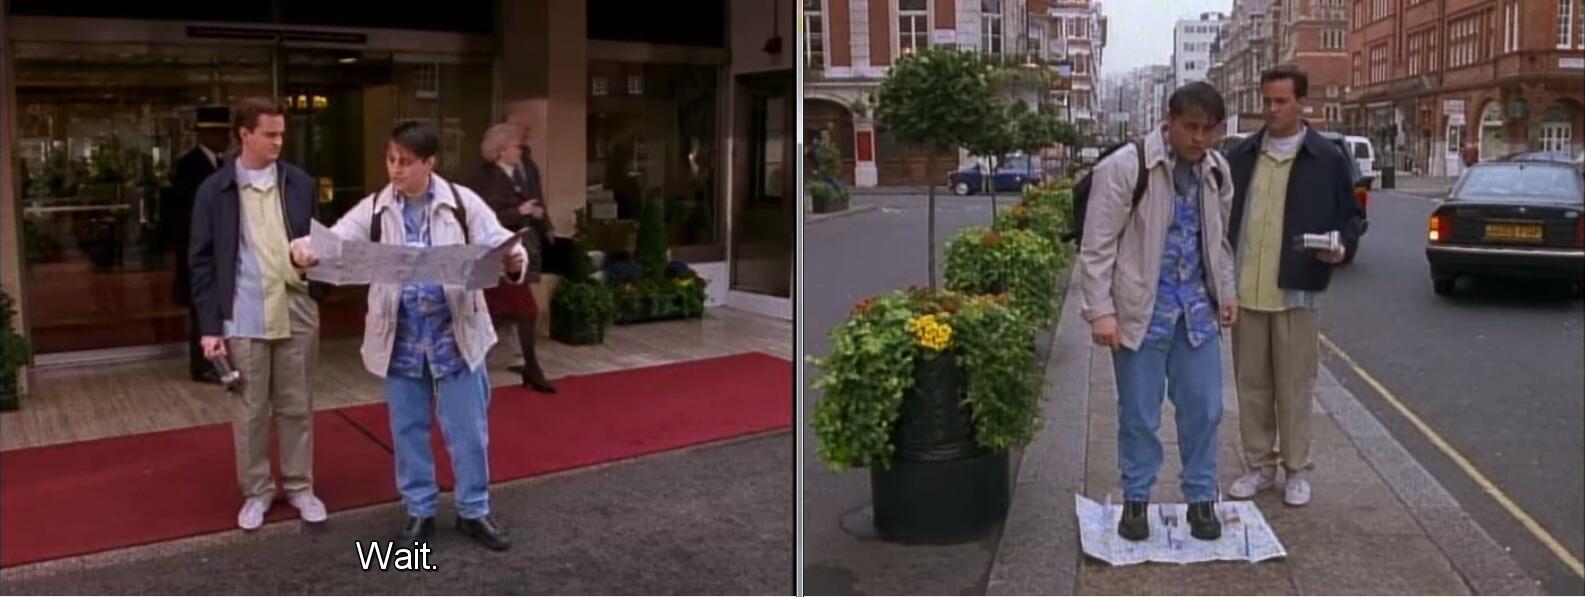 Meme: Scene from the TV show 'Friends'. Man is seen trying to read a map, confused. Resorts to standing on it. 

For blog: Marketers: How To Navigate A Competitive Job Market